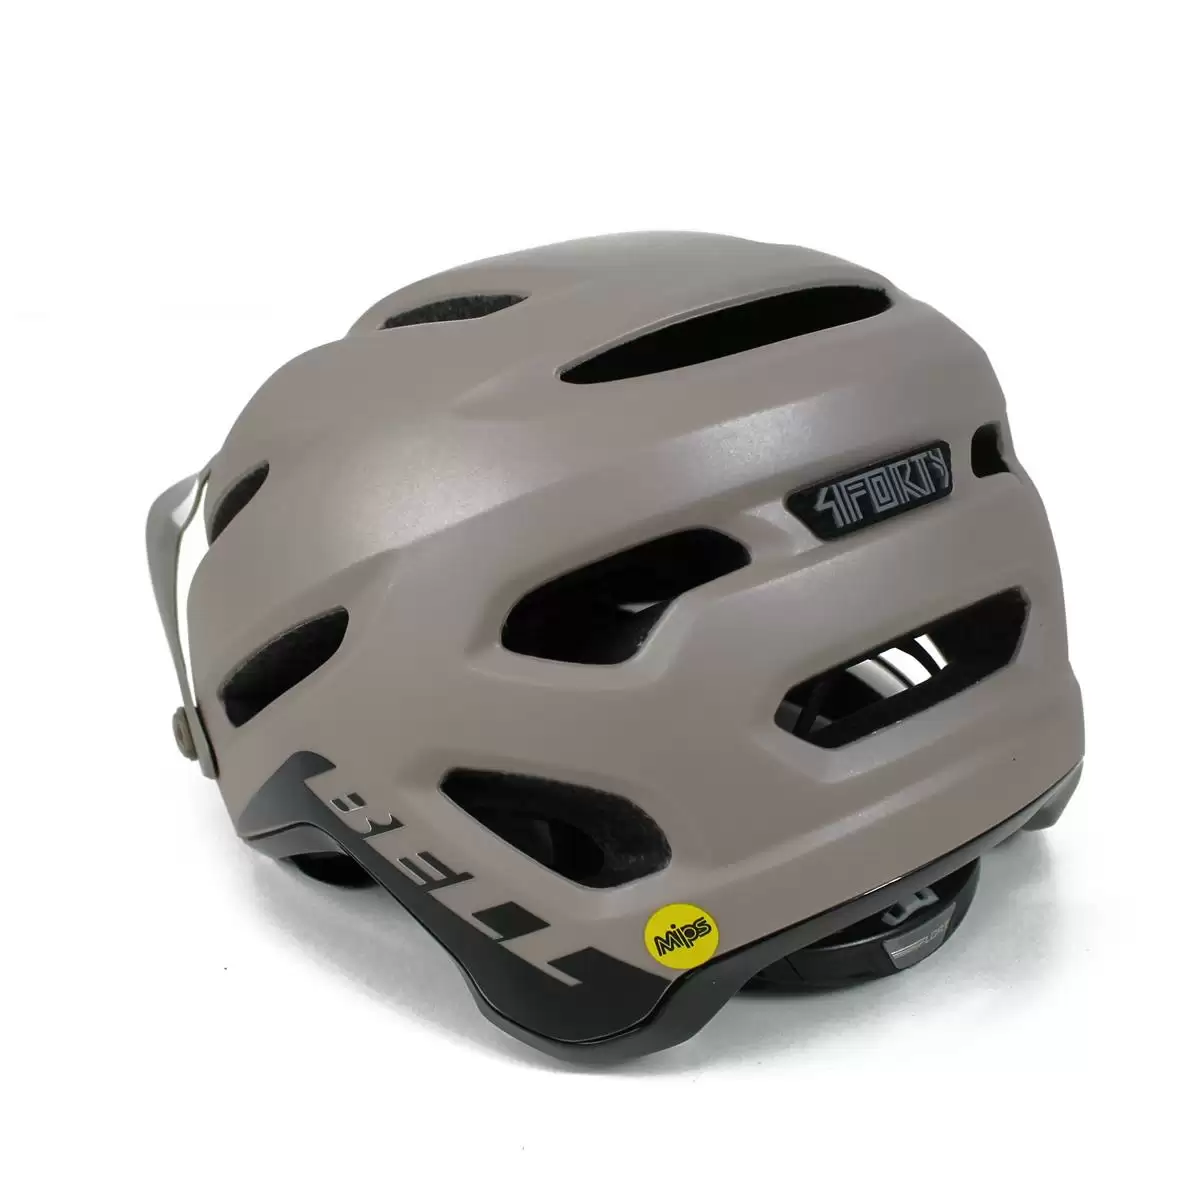 Helmet 4FORTY MIPS Sand size S (52-56cm) #1